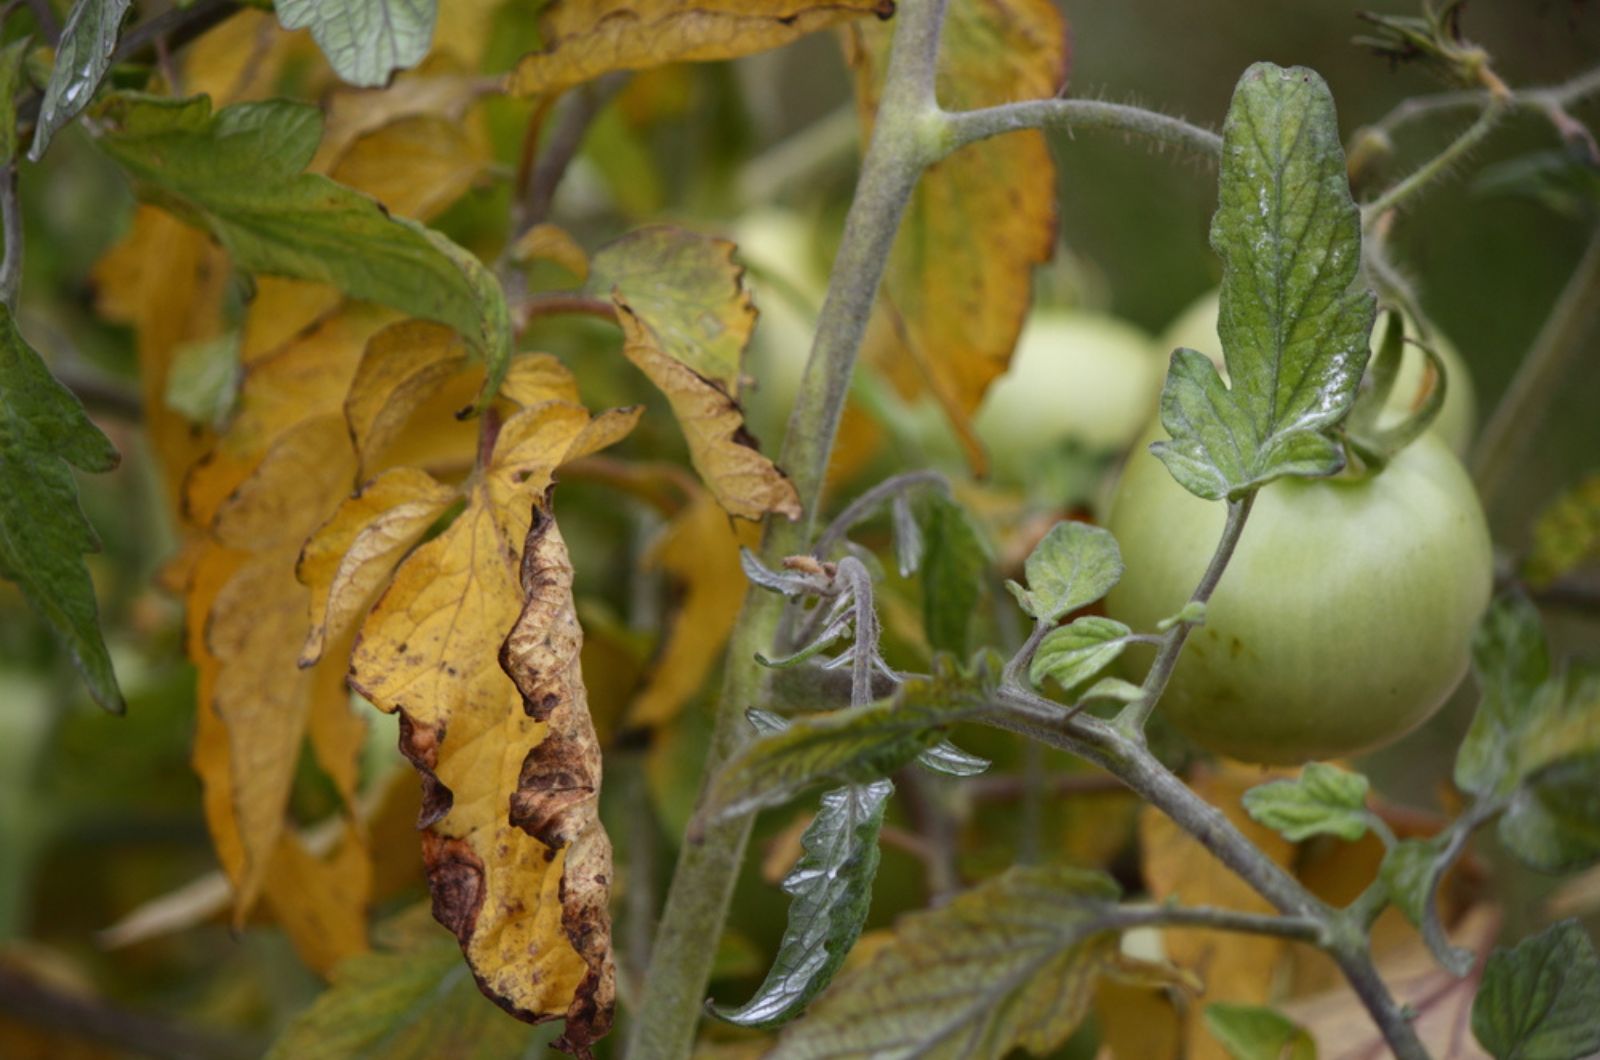 curling yellowing leaves of a tomato plant